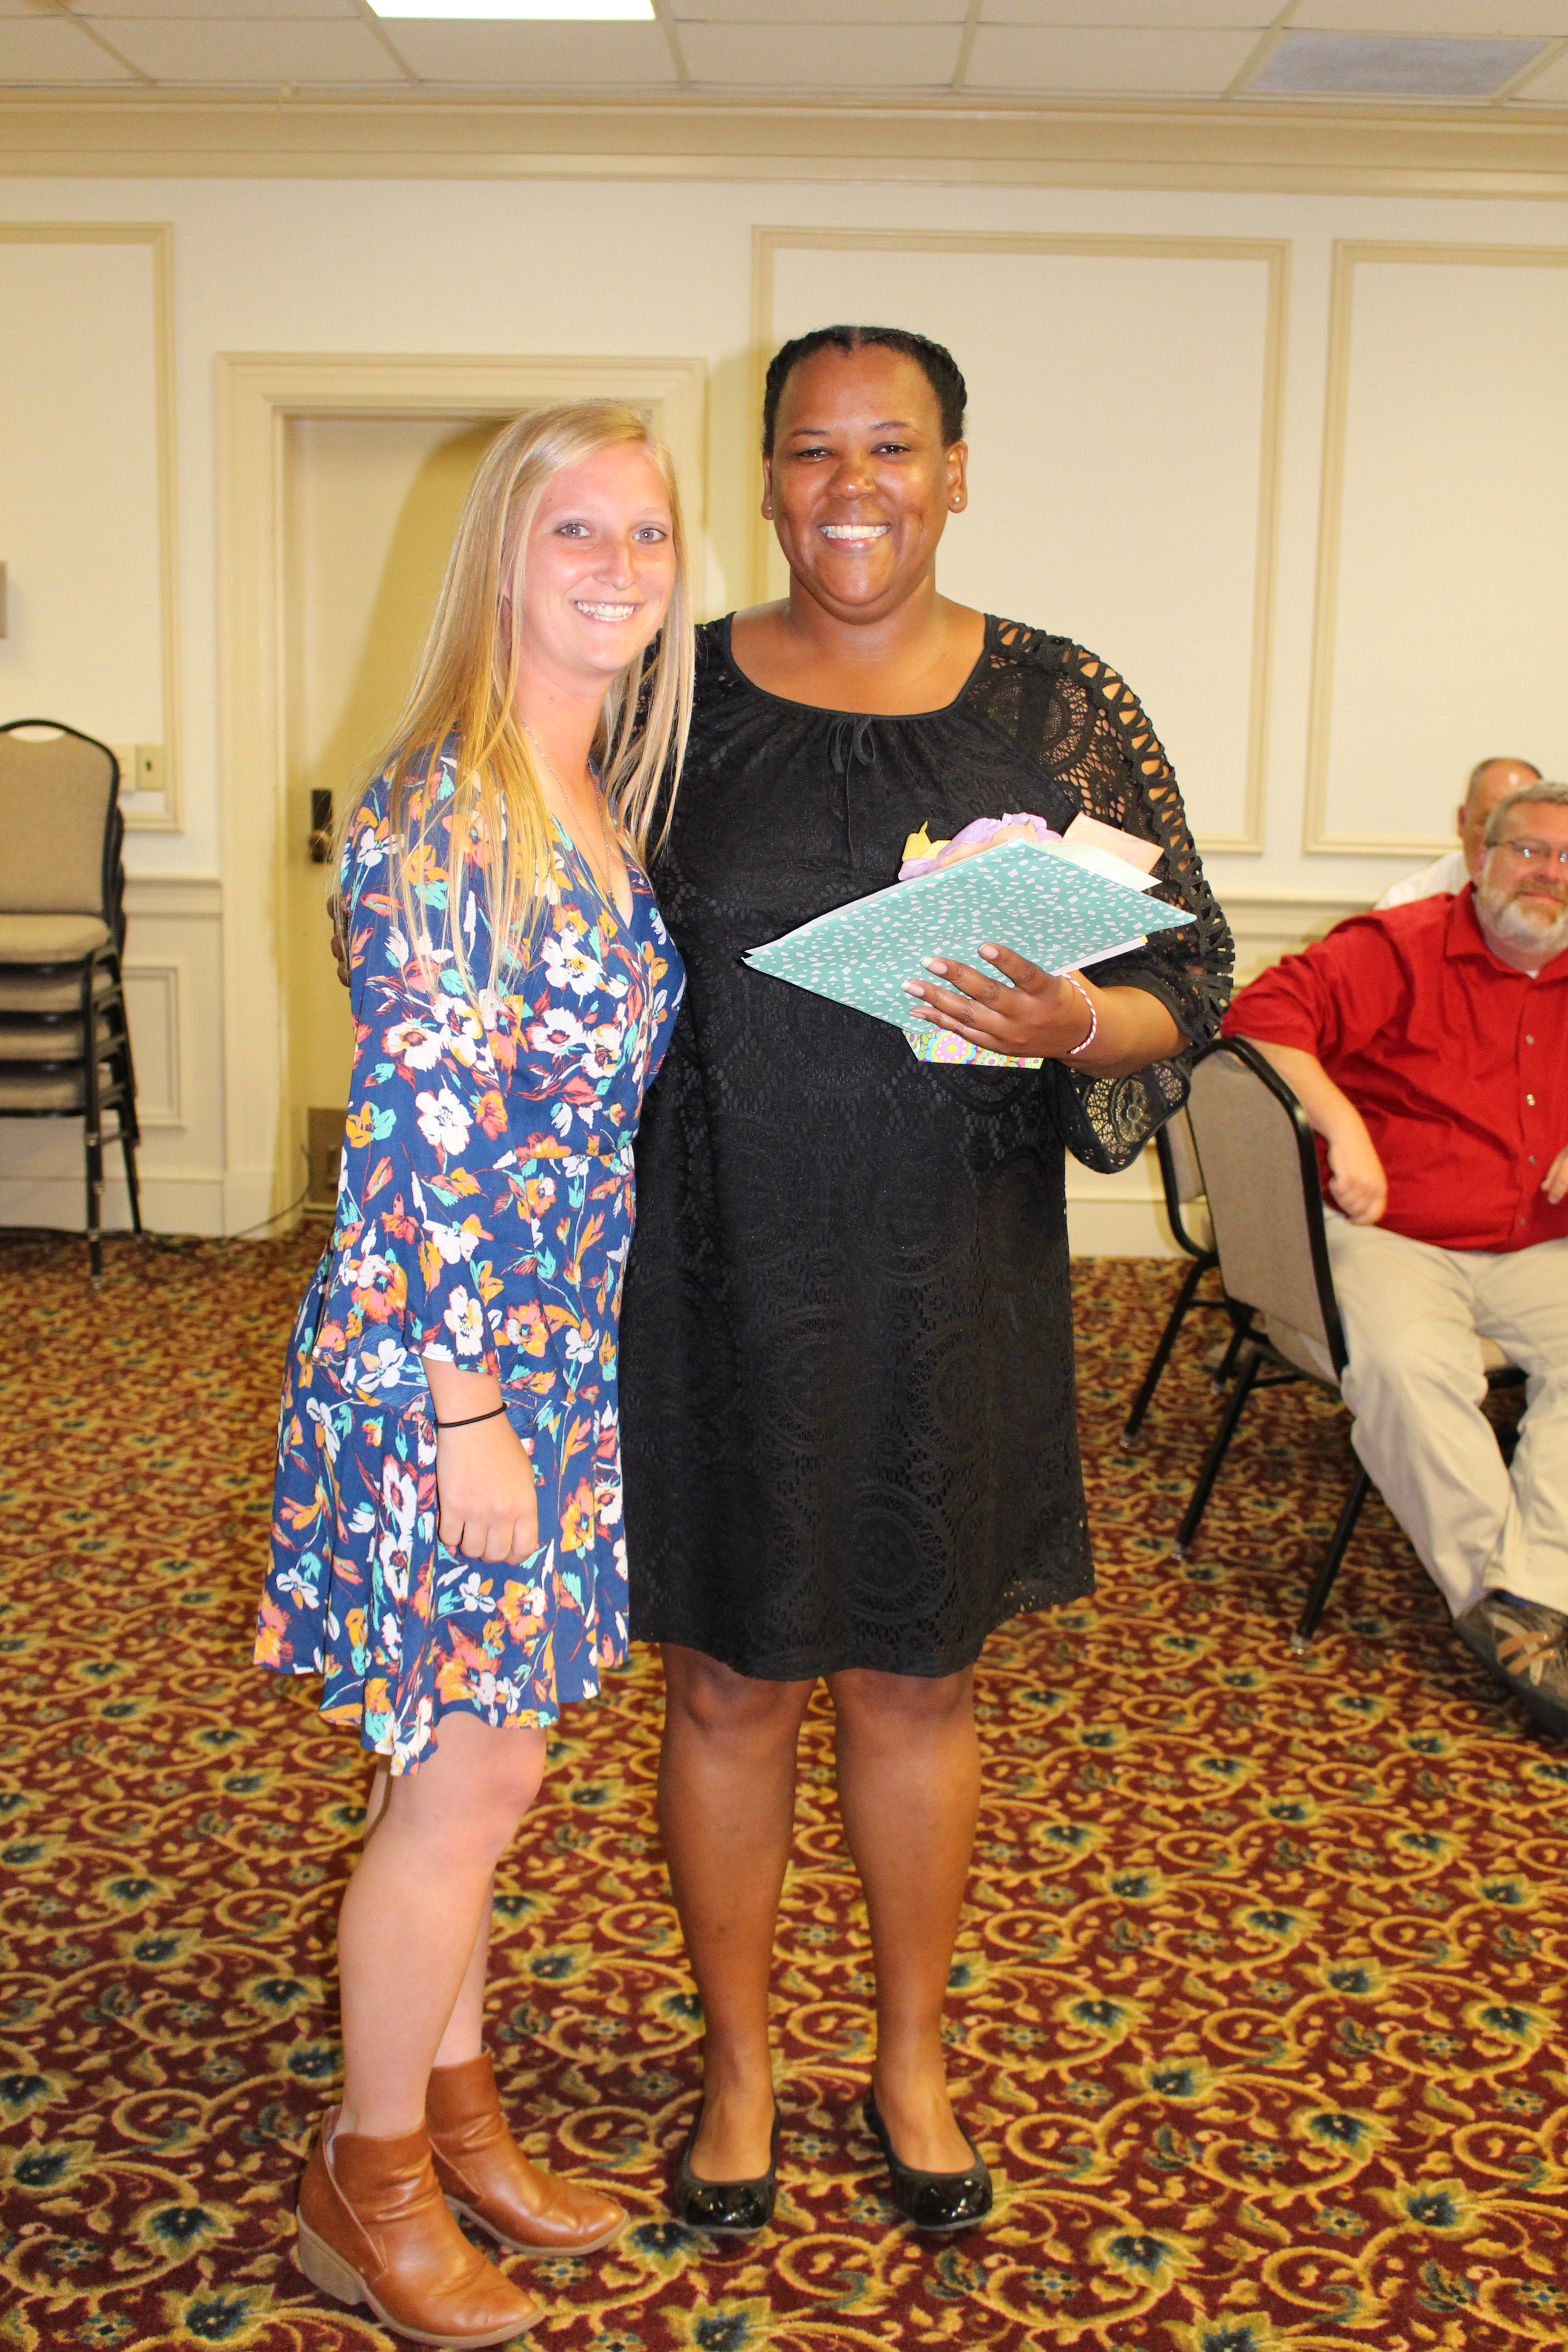 Tiffany Watson expressed her appreciation for athletic director Marsha Ford.